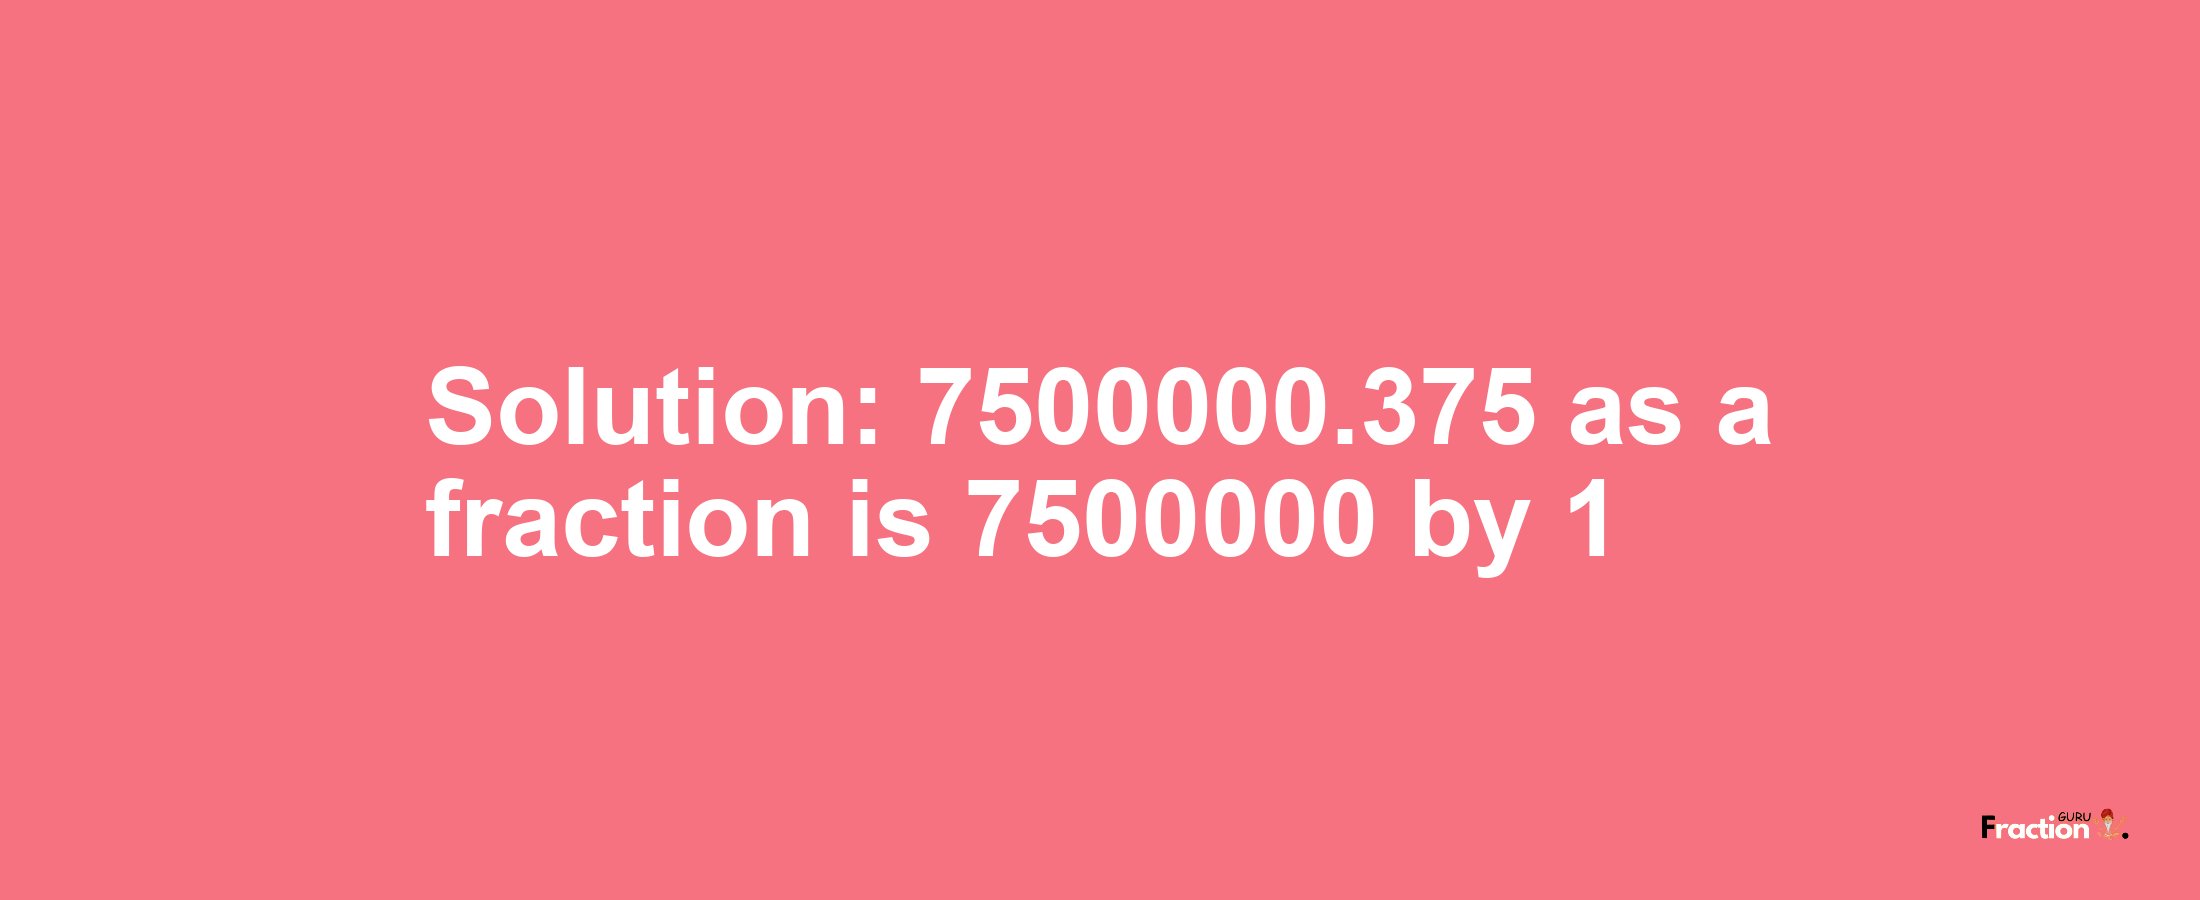 Solution:7500000.375 as a fraction is 7500000/1